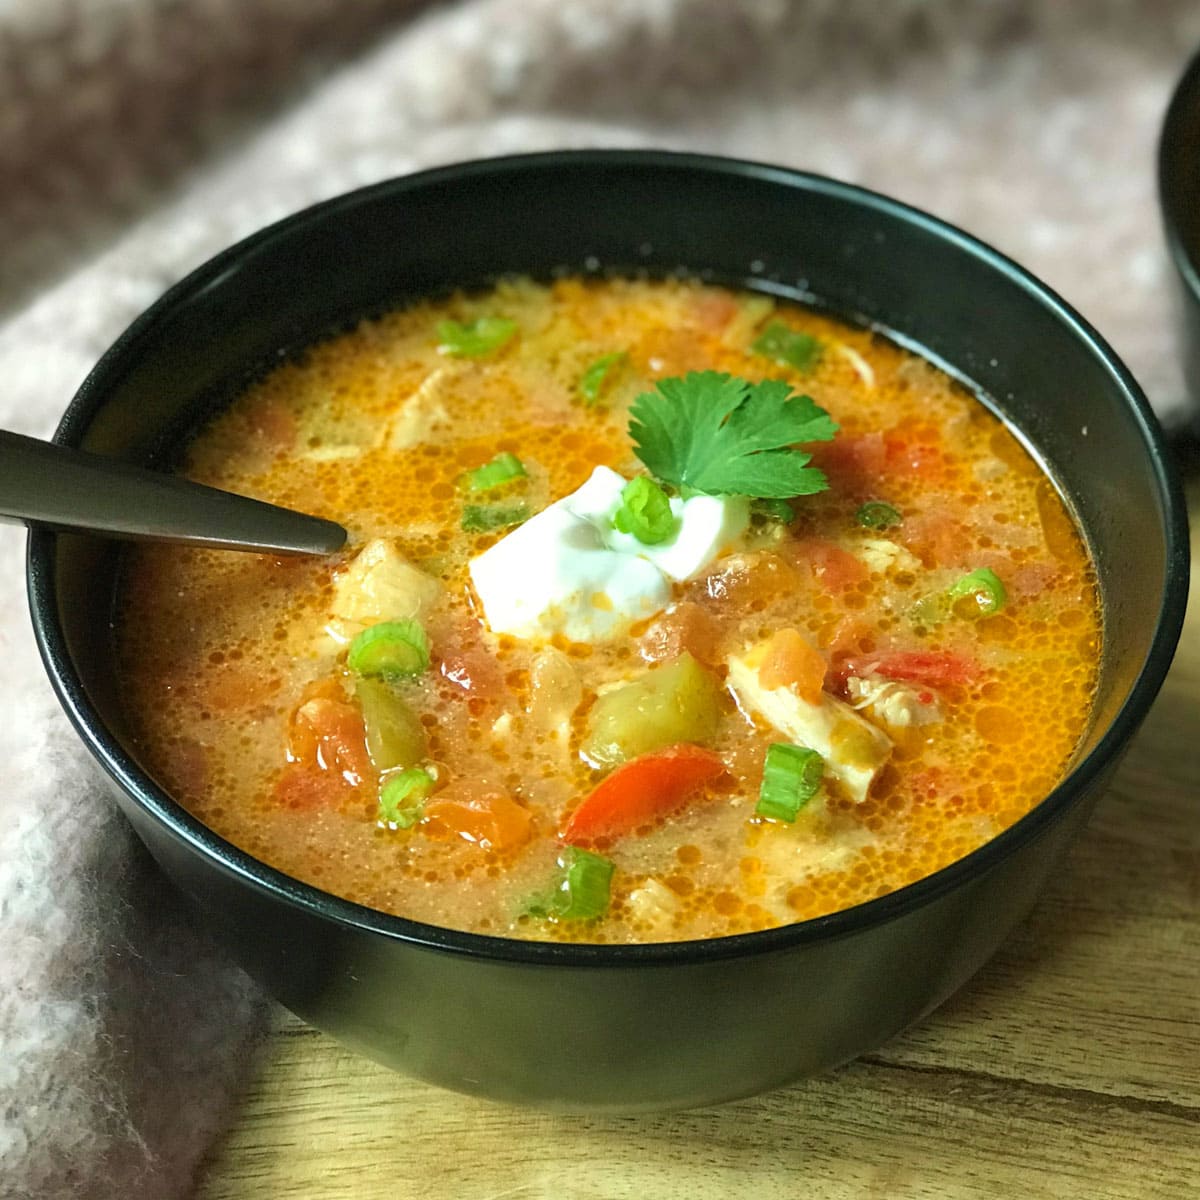 Chicken fajita soup served in a black bowl topped with sour cream